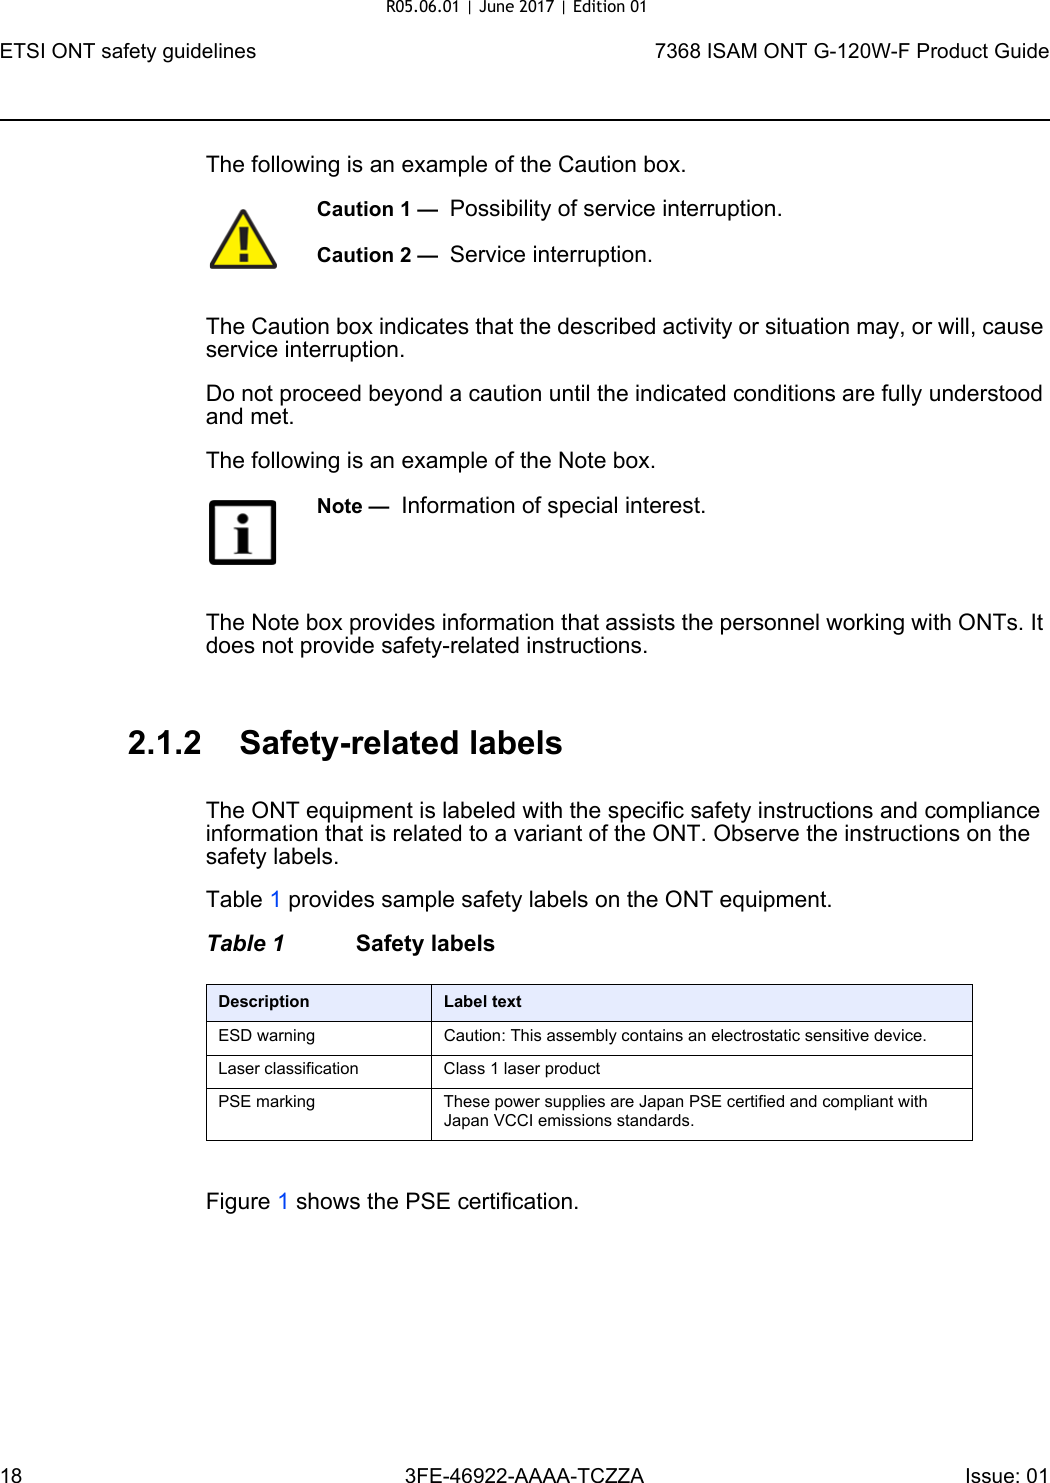 ETSI ONT safety guidelines187368 ISAM ONT G-120W-F Product Guide3FE-46922-AAAA-TCZZA Issue: 01 The following is an example of the Caution box.The Caution box indicates that the described activity or situation may, or will, cause service interruption.Do not proceed beyond a caution until the indicated conditions are fully understood and met.The following is an example of the Note box.The Note box provides information that assists the personnel working with ONTs. It does not provide safety-related instructions.2.1.2 Safety-related labelsThe ONT equipment is labeled with the specific safety instructions and compliance information that is related to a variant of the ONT. Observe the instructions on the safety labels.Table 1 provides sample safety labels on the ONT equipment.Table 1 Safety labelsFigure 1 shows the PSE certification.Caution 1 —  Possibility of service interruption.Caution 2 —  Service interruption.Note —  Information of special interest.Description Label textESD warning Caution: This assembly contains an electrostatic sensitive device.Laser classification Class 1 laser productPSE marking These power supplies are Japan PSE certified and compliant with Japan VCCI emissions standards.R05.06.01 | June 2017 | Edition 01 